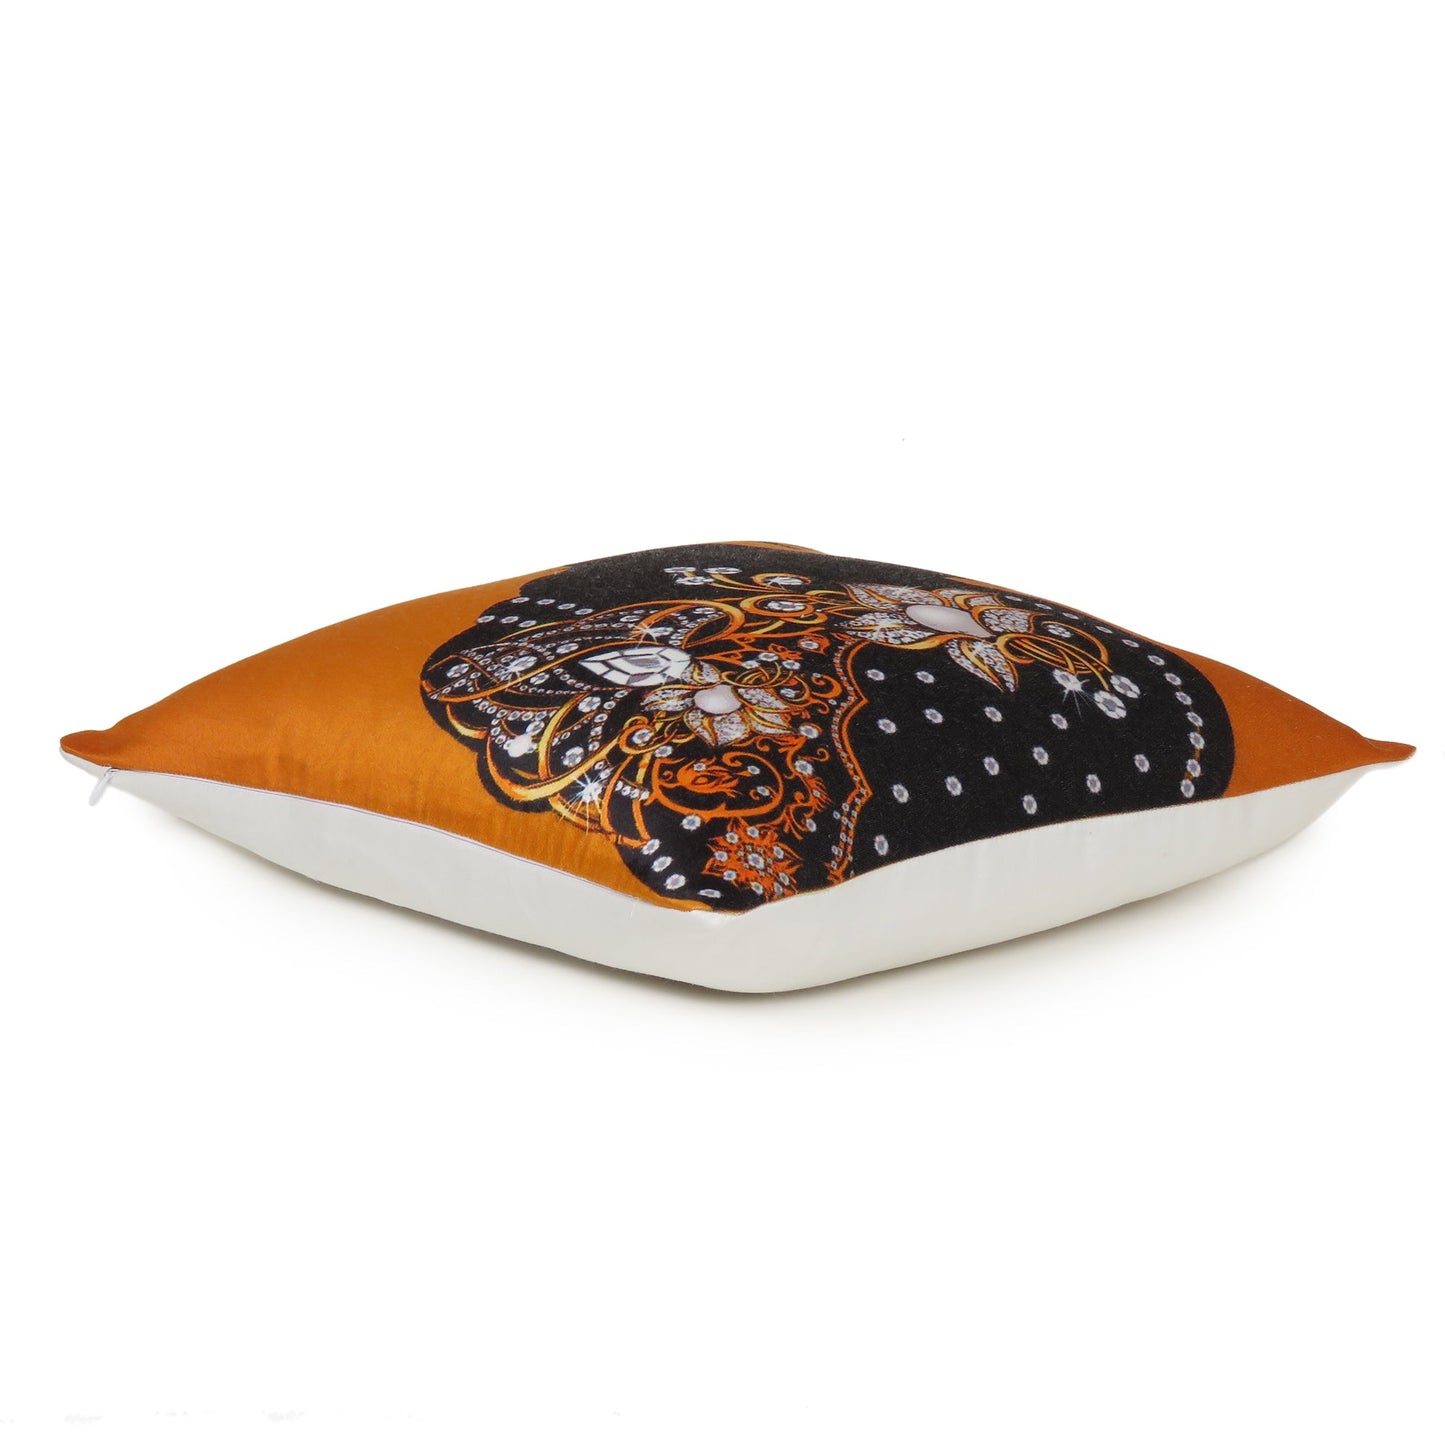 Orange Lady Printed Cushion Cover in Set of 2